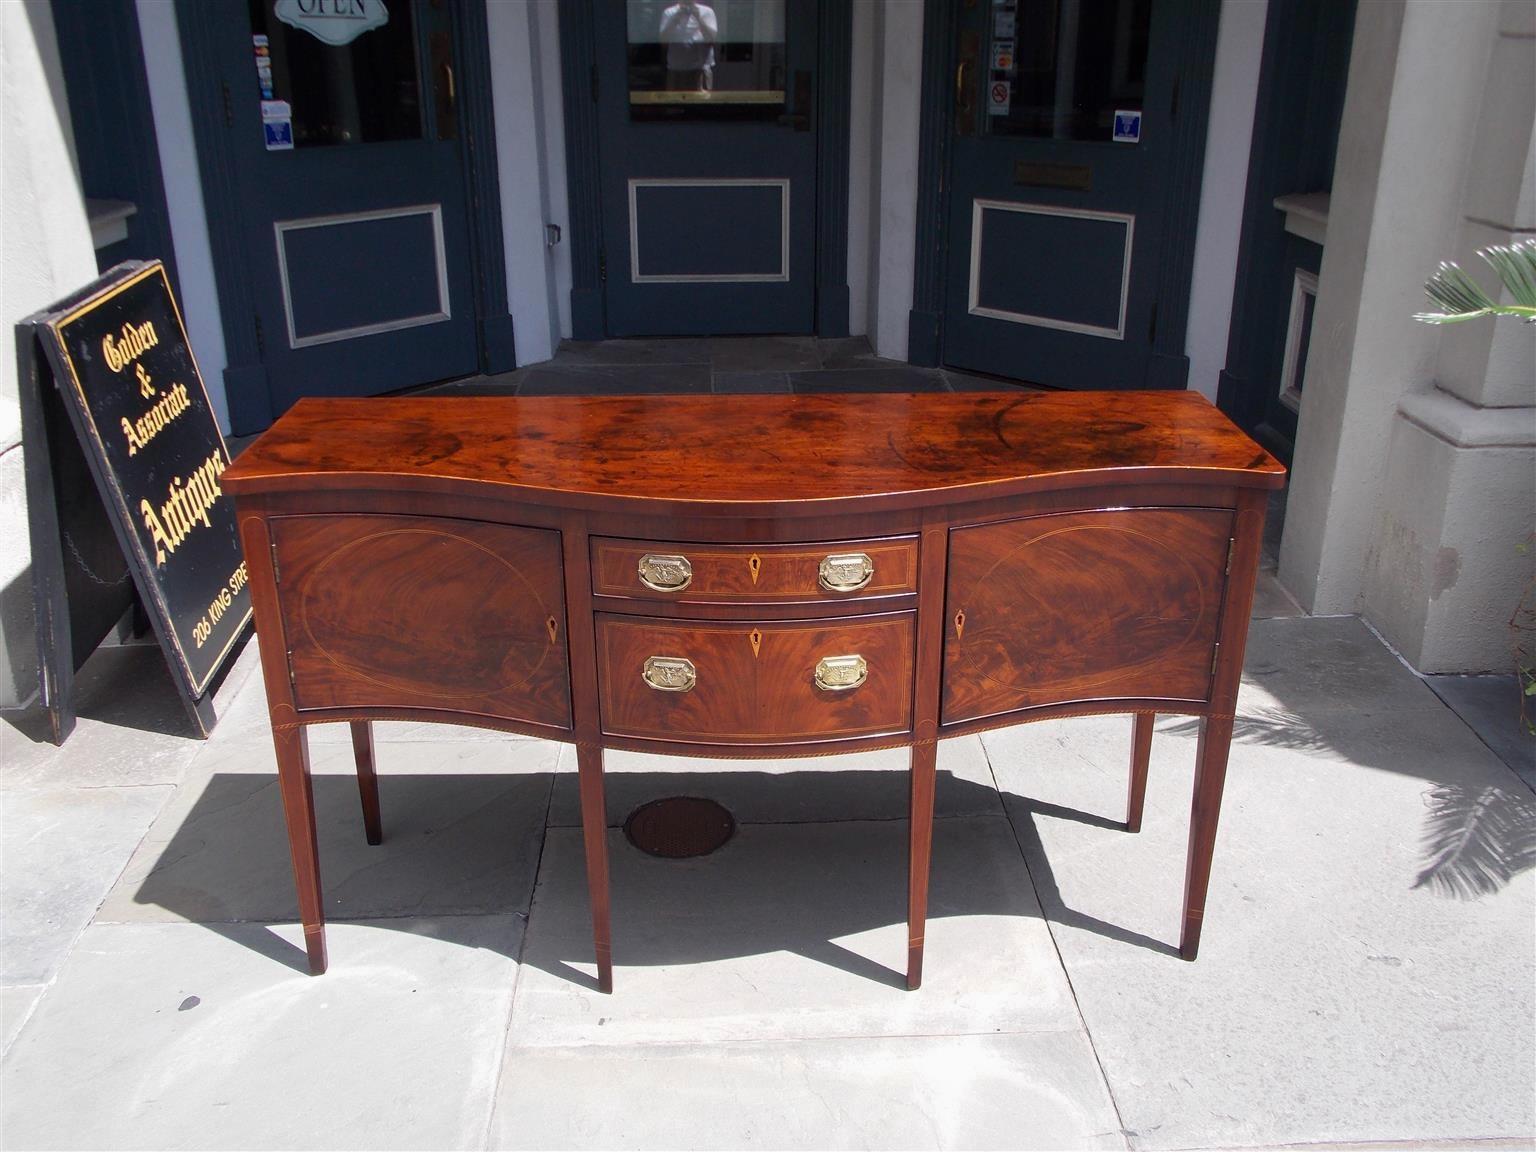 American mahogany serpentine brandy board with two graduated centered drawers, diamond satinwood inlaid escutcheons flanked by period rectangular eagle brasses, two hinged cabinets with flanking oval satinwood inlays, and terminating on the original